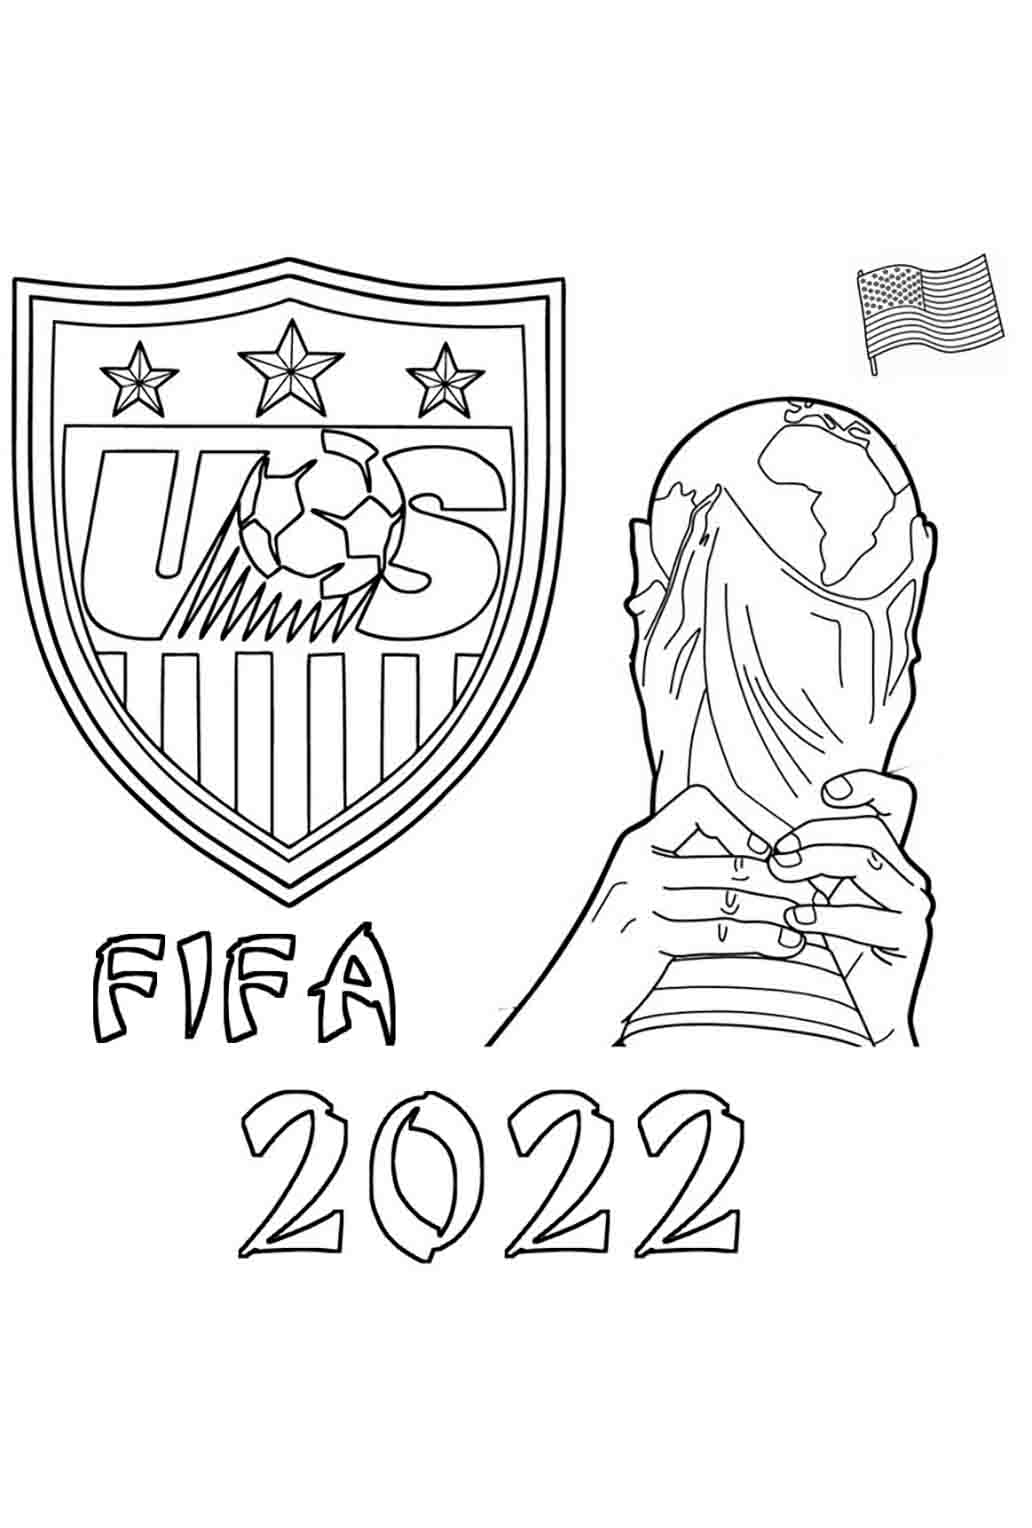 United States fifa world cup 2022